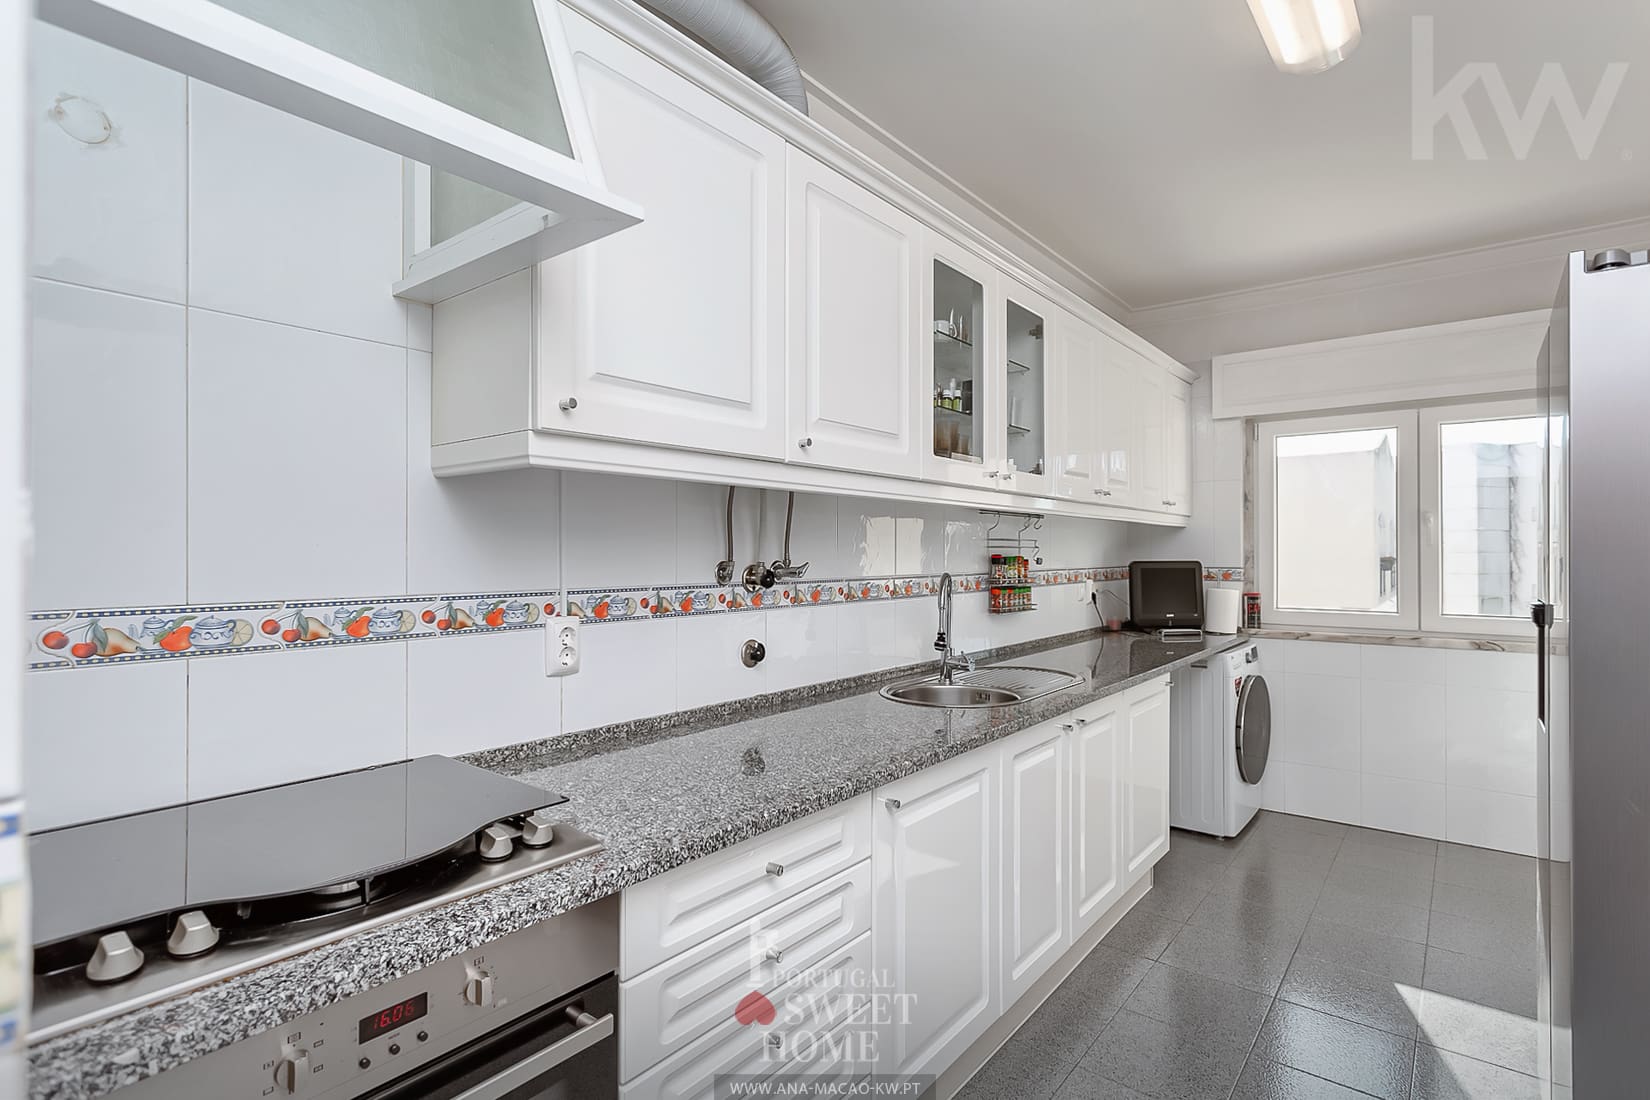 Fully equipped kitchen (12.84 m2)